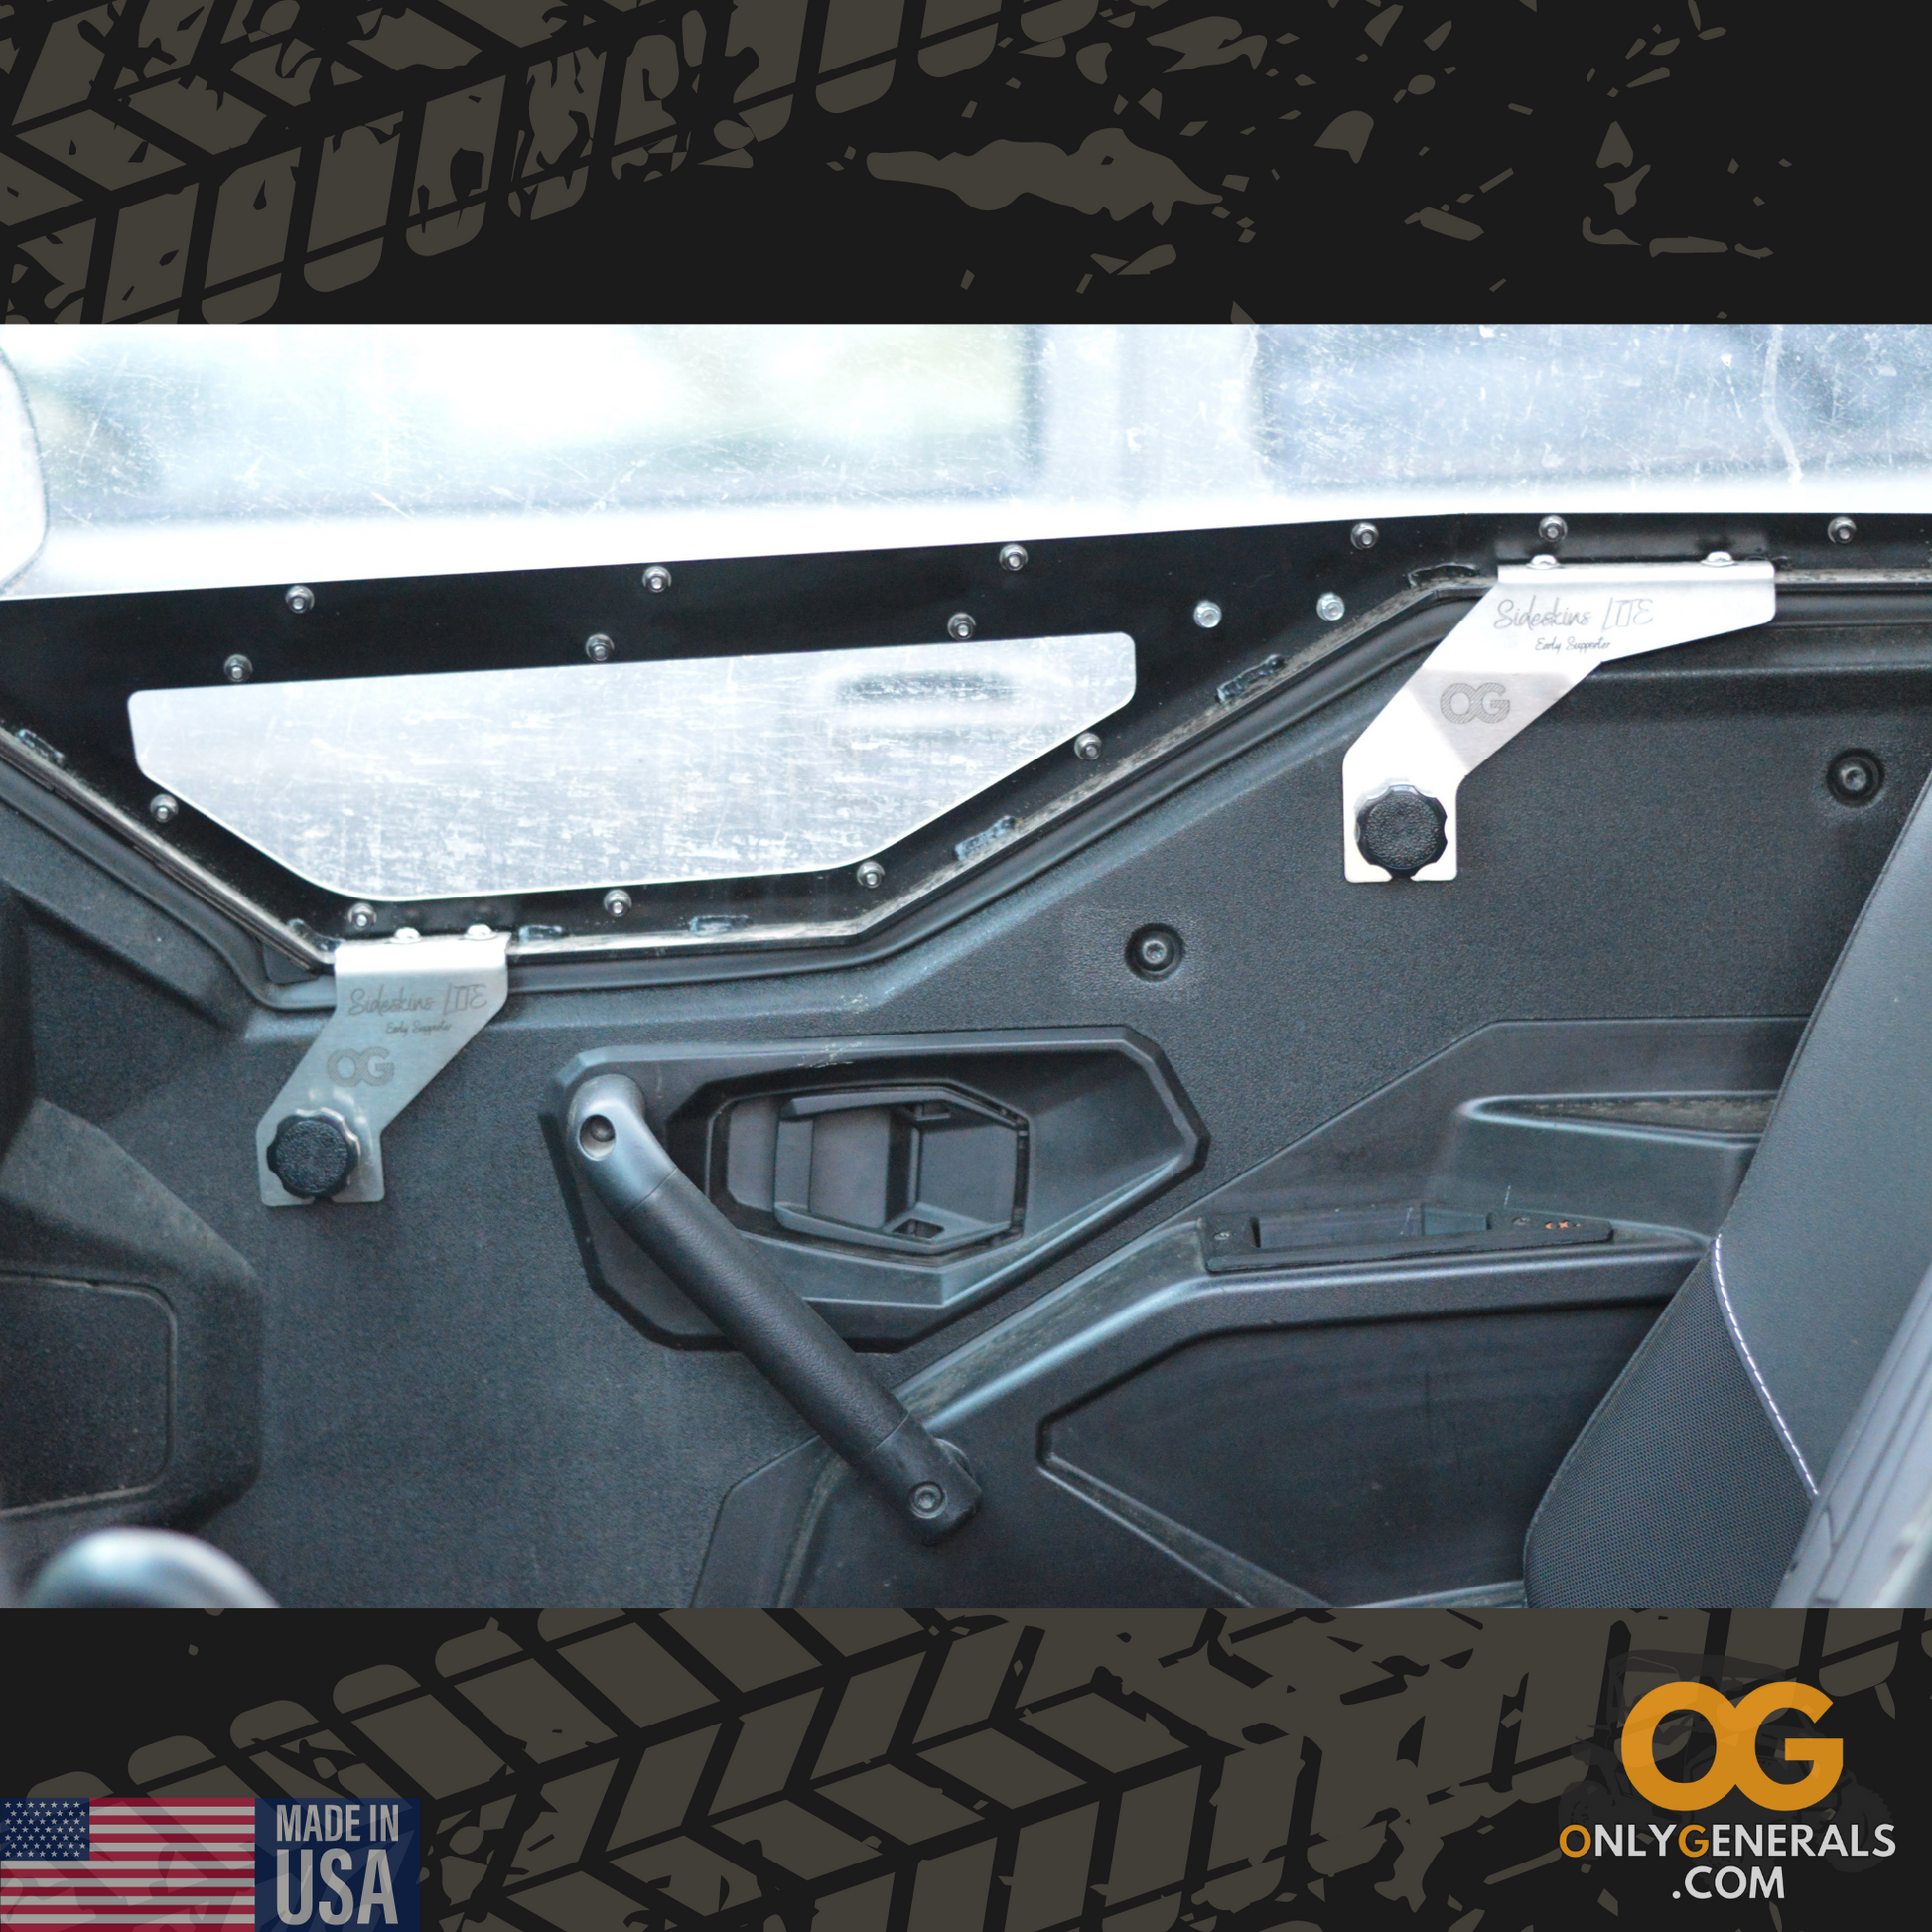 A stunning interior shot of the mounting system for the Polaris General SideskinsLITE hard upper doors by OnlyGenerals